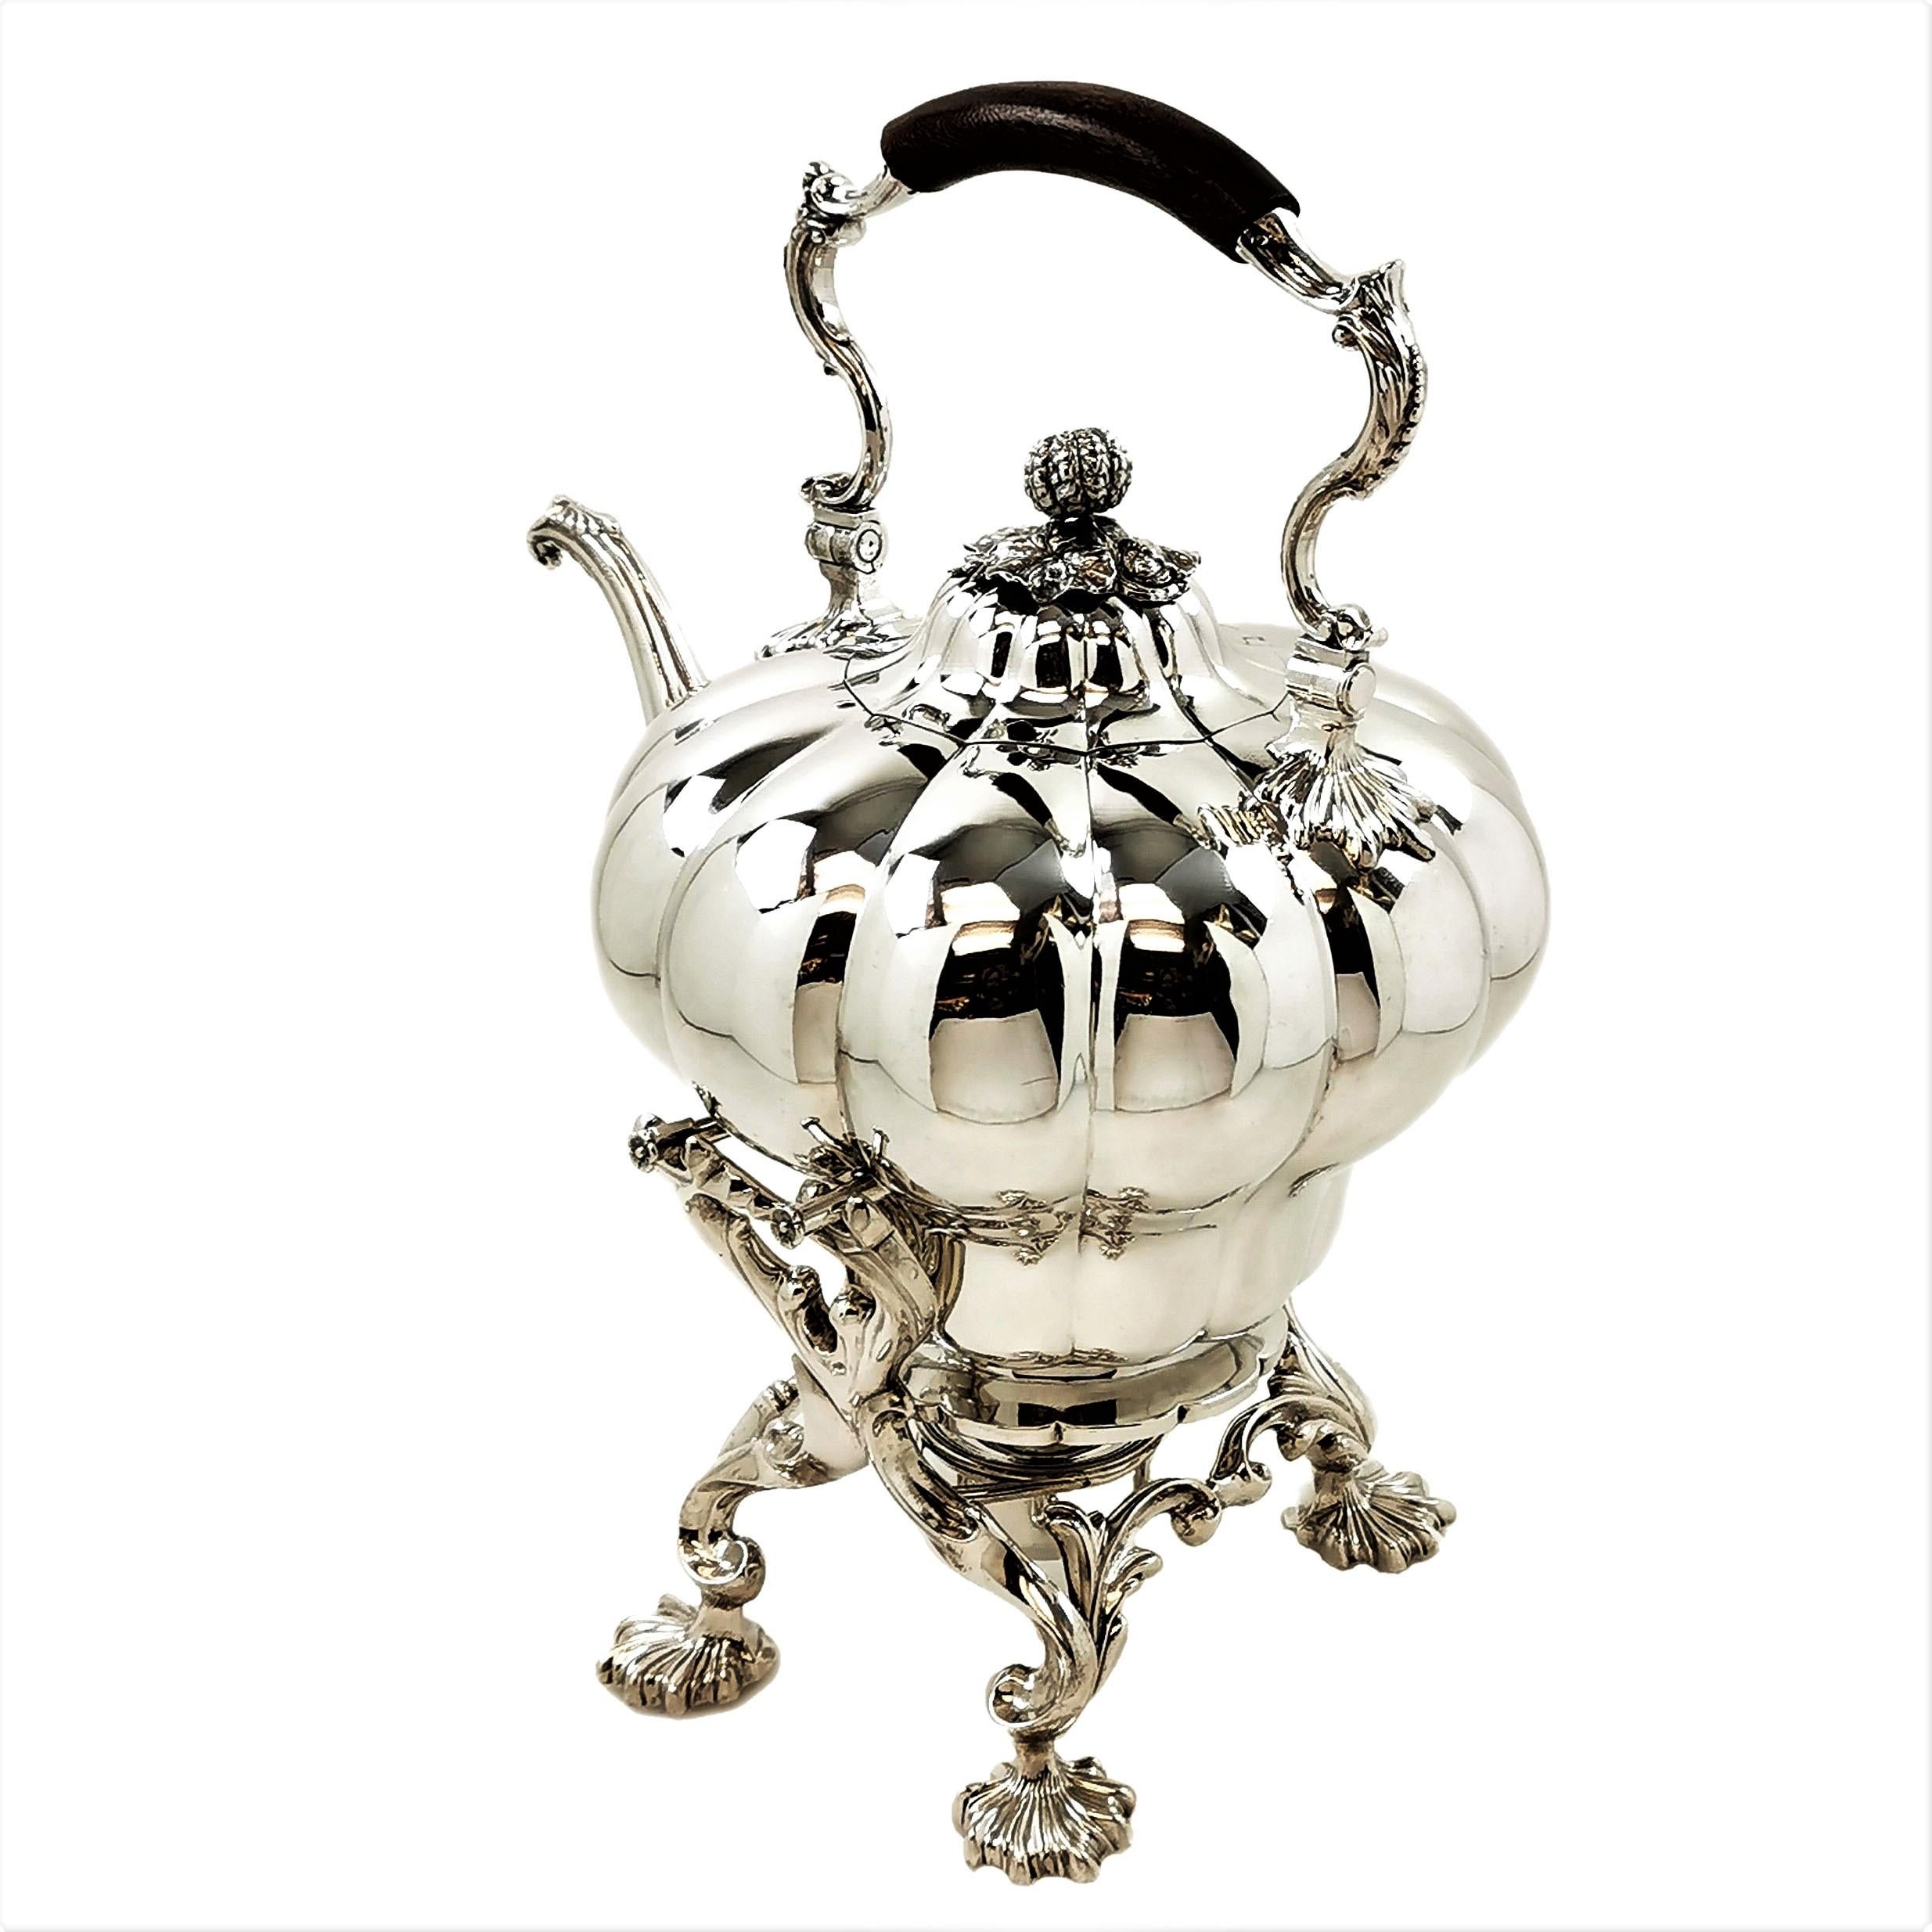 19th Century Large Antique William IV Sterling Silver Kettle on Stand 1836 Melon Pattern